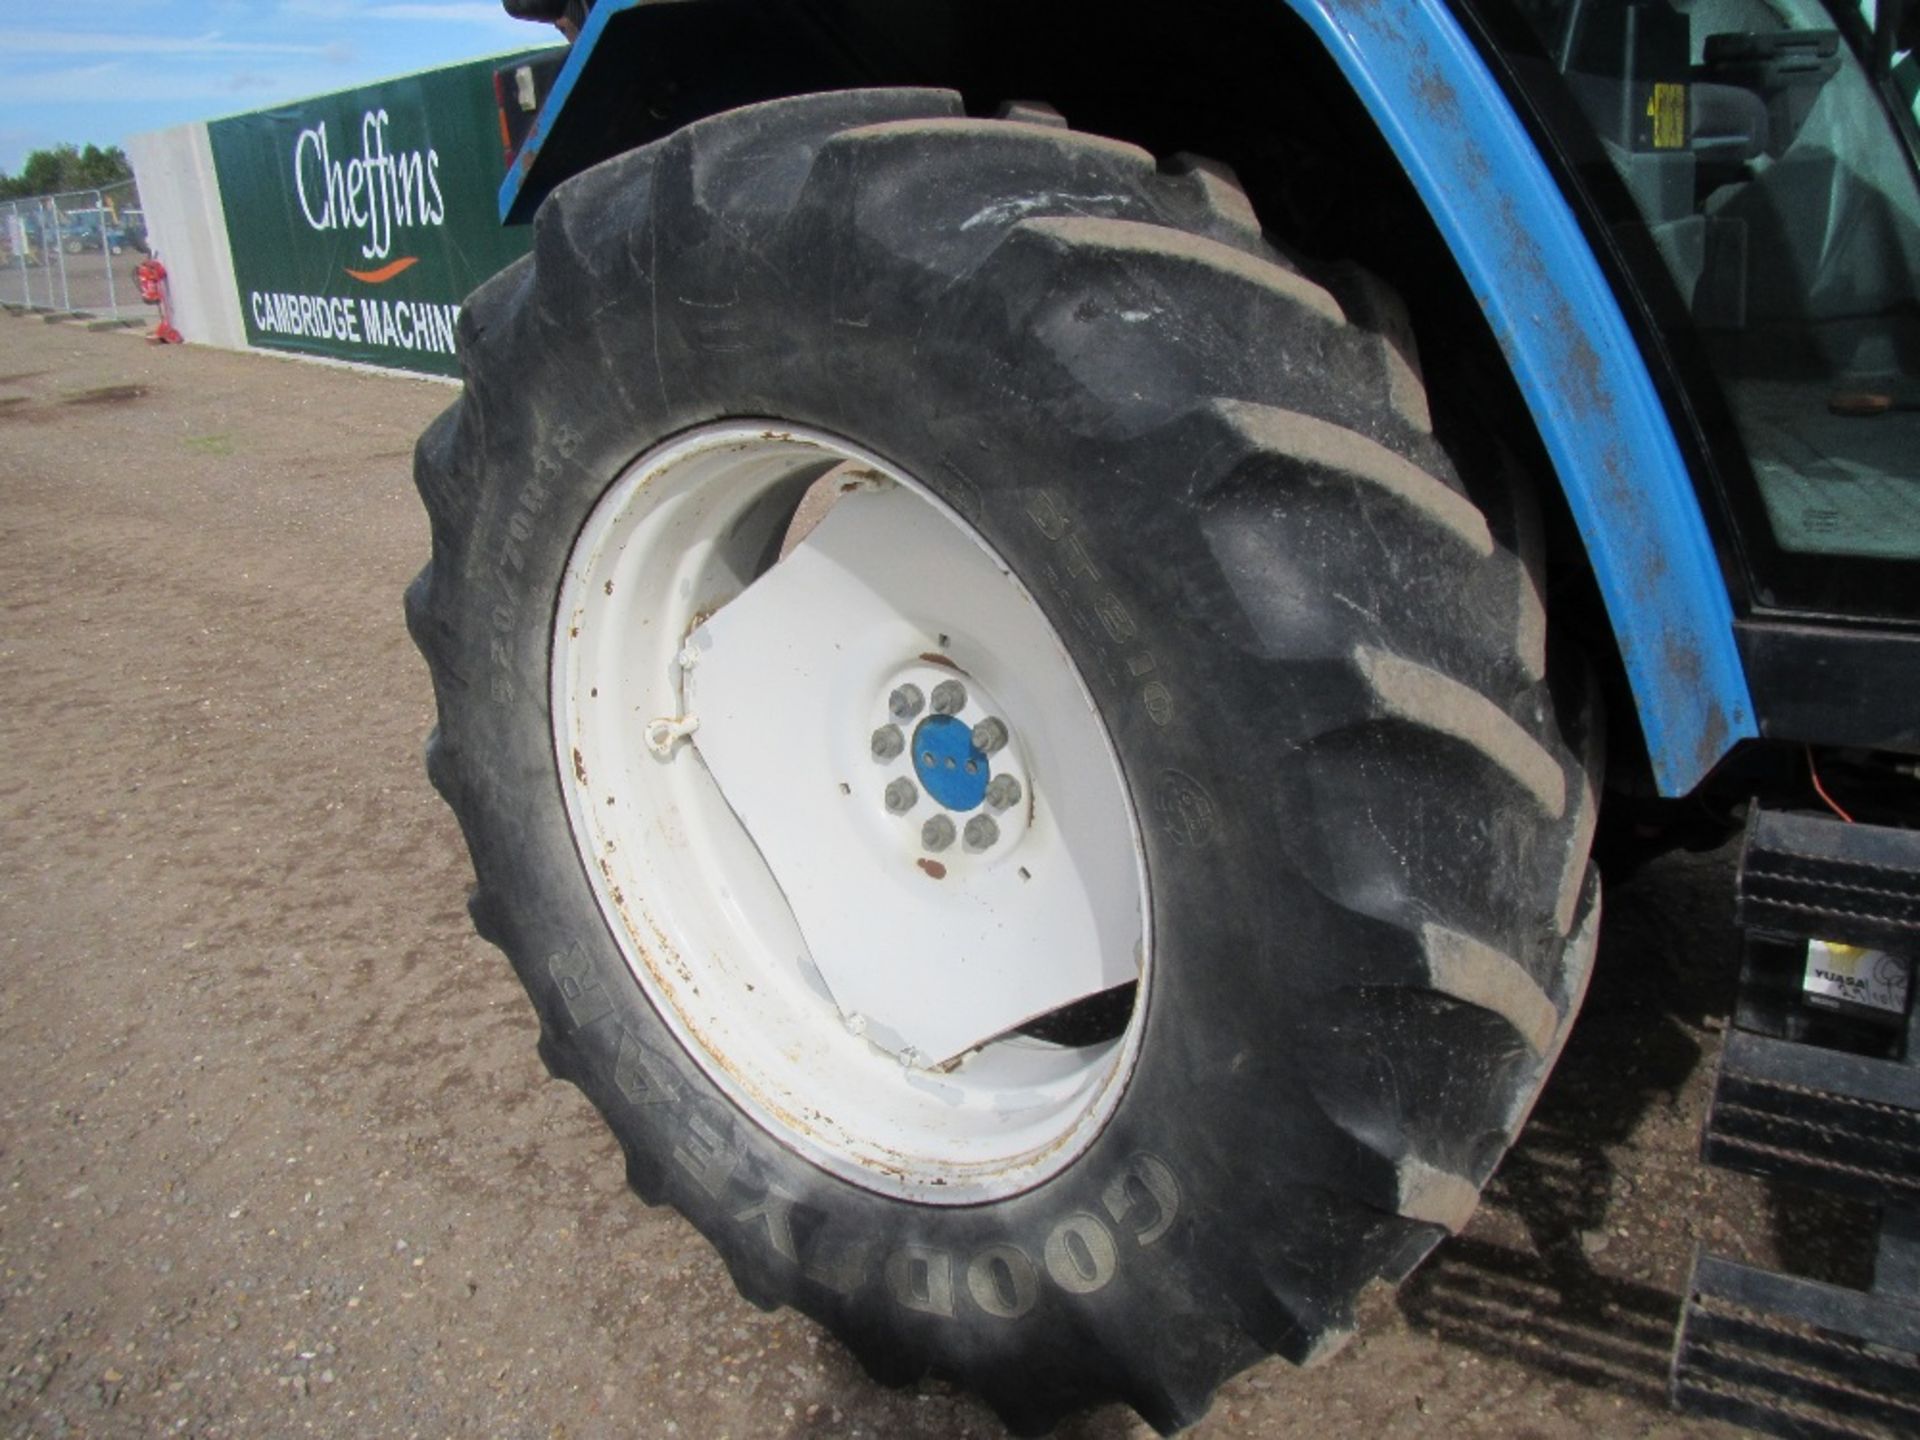 1994 Ford 8340 Powerstar SLE 4wd Tractor with Front Linkage & PTO Reg. No. L379 ELJ Ser No BD79914 - Image 6 of 18